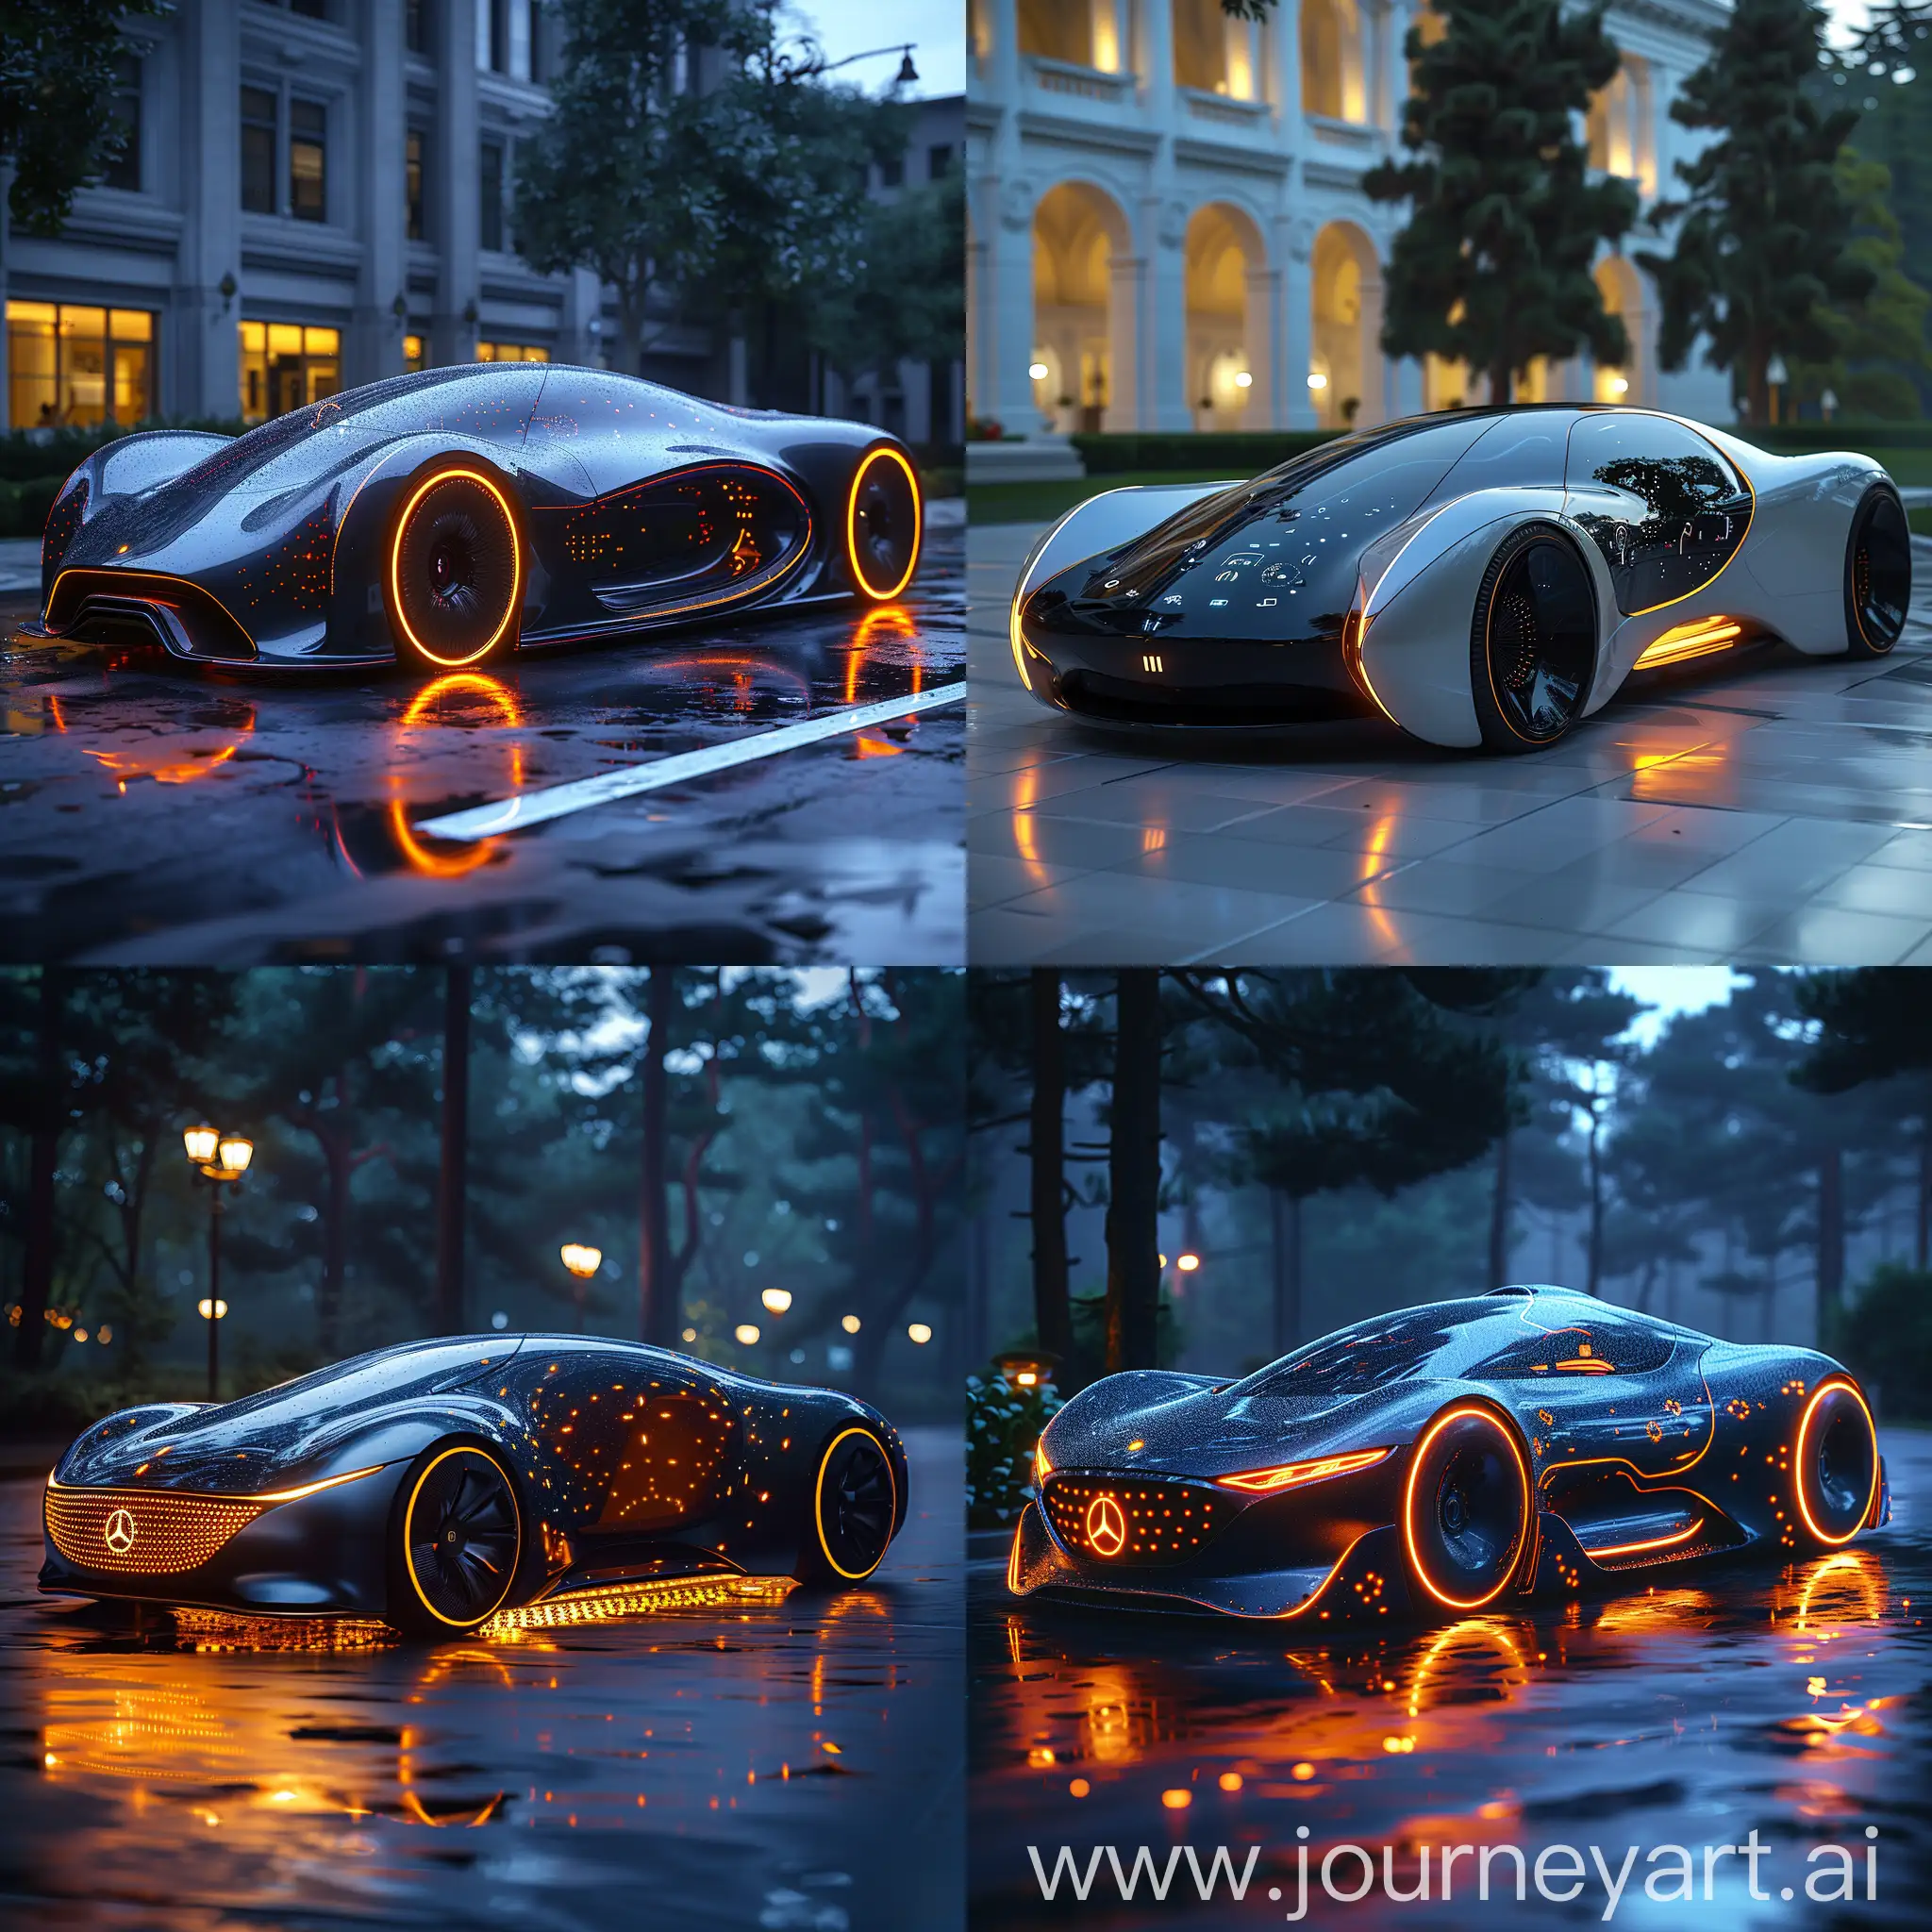 Futuristic car, Autonomous Driving, Biometric Access, Augmented Reality Windshield, Health Monitoring System, Holographic Displays, Self-Healing Paint, Smart Glass Roof, Energy-Harvesting Body Panels, Gesture Control, AI Personal Assistant, Sleek Aerodynamic Shape, LED Lighting, Smart Doors, Carbon Fiber Construction, Pop-Out Cameras, Floating Seats, Interactive Exterior Lighting, 360-Degree Cameras, Minimalist Interior, Artificial Intelligence Integration, octane render --stylize 1000